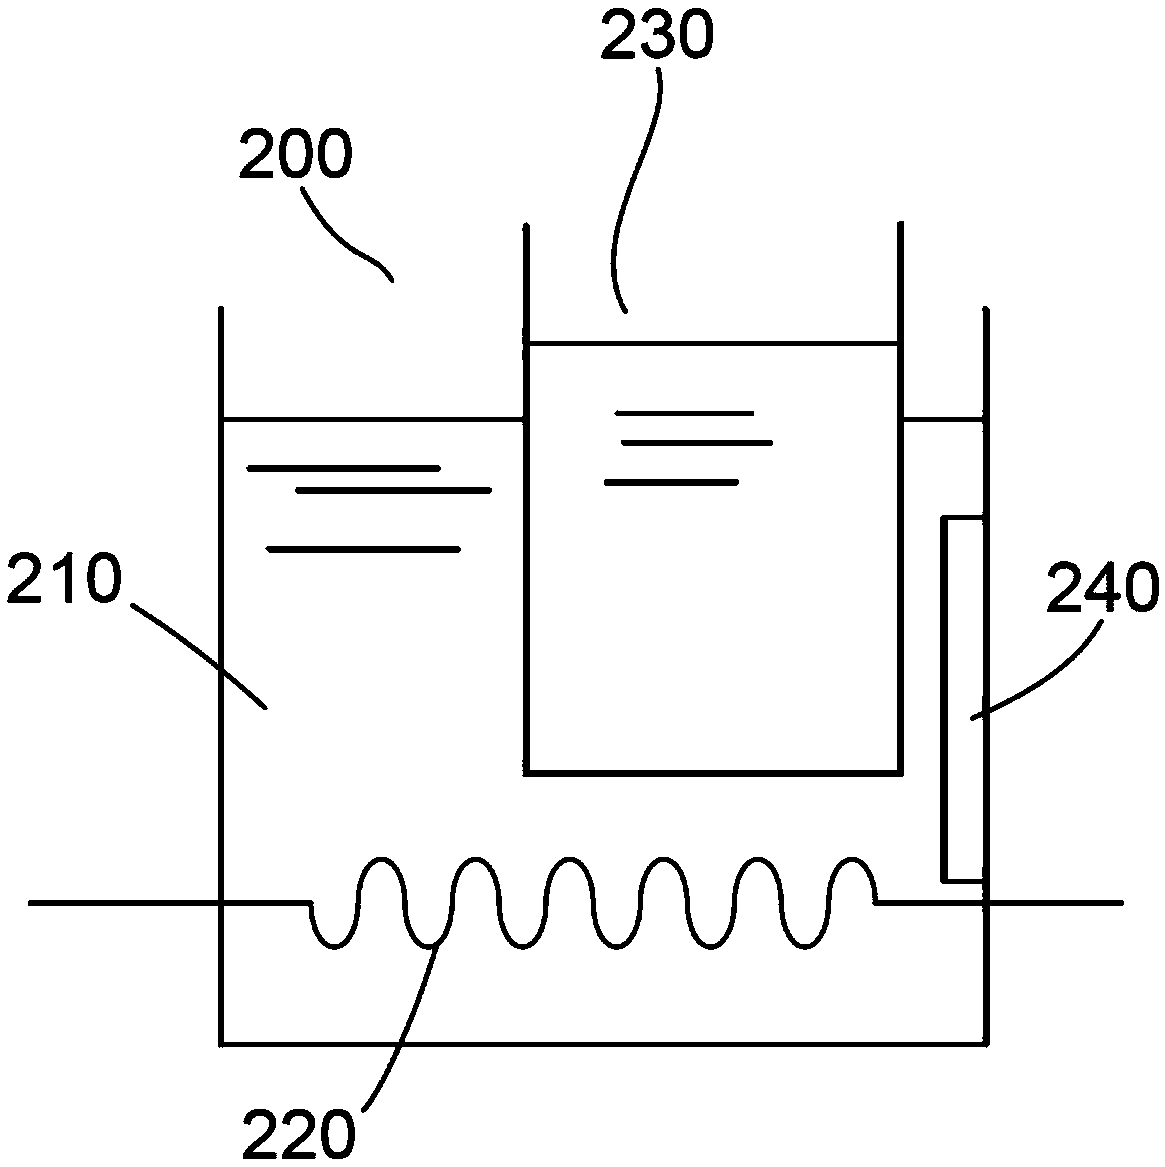 Silicon wafer cutting liquid circulation system and method adopting diamond wire